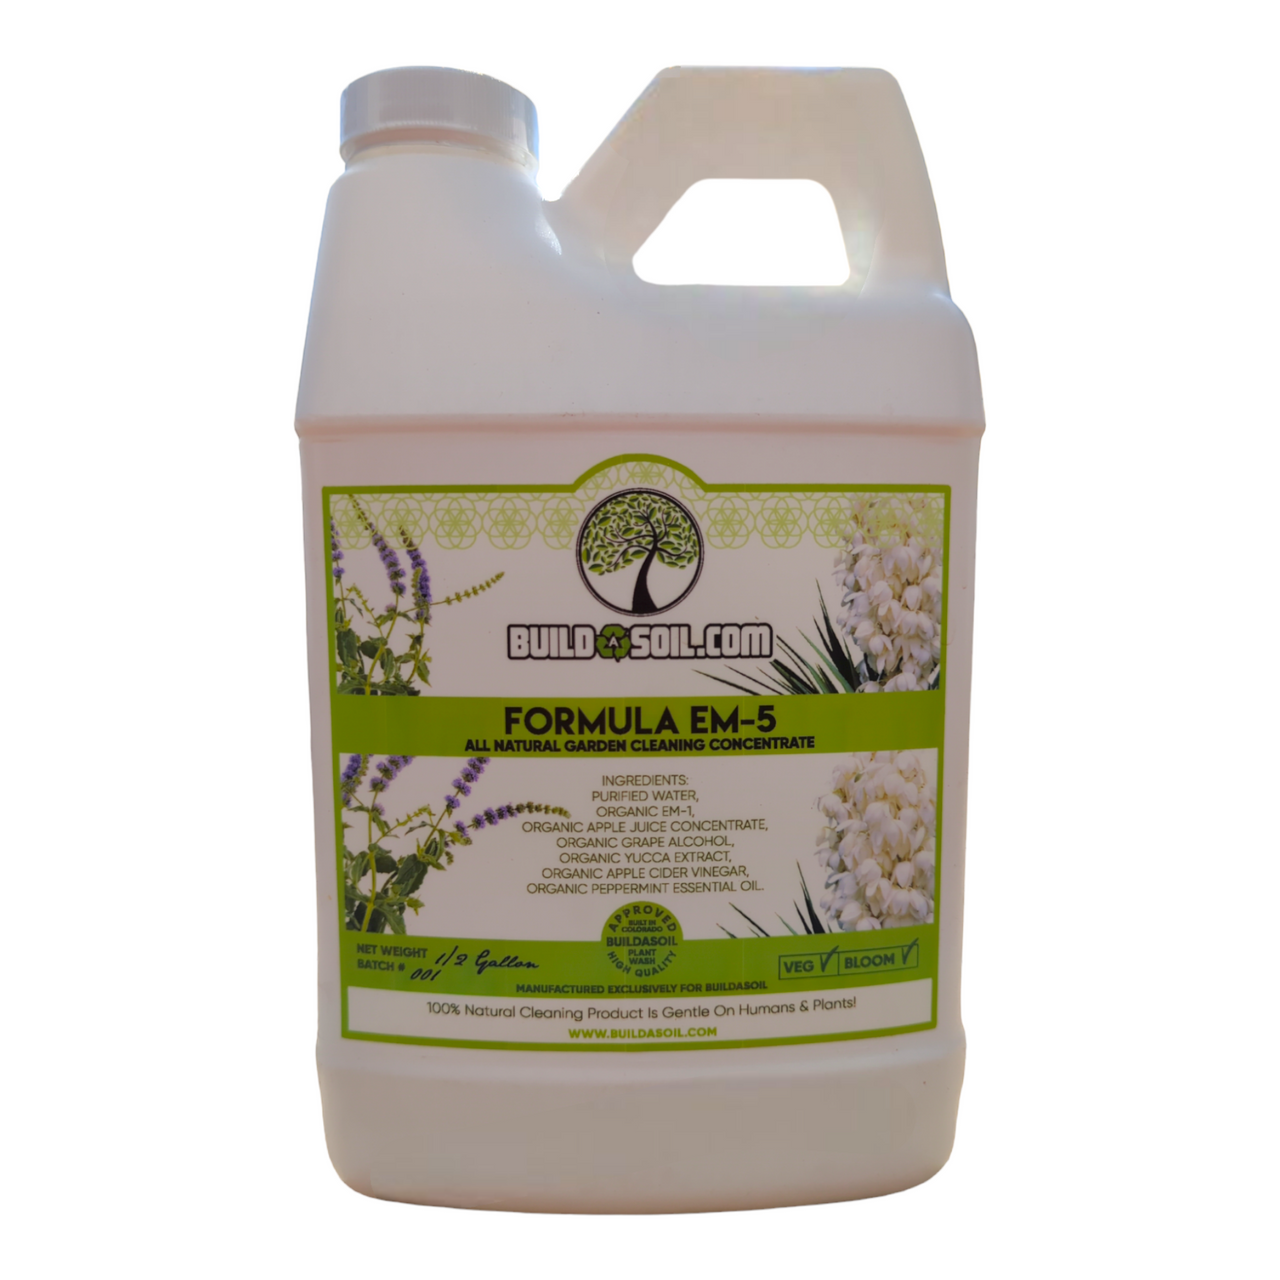 Formula EM-5 - All Natural Garden Cleaning Concentrate